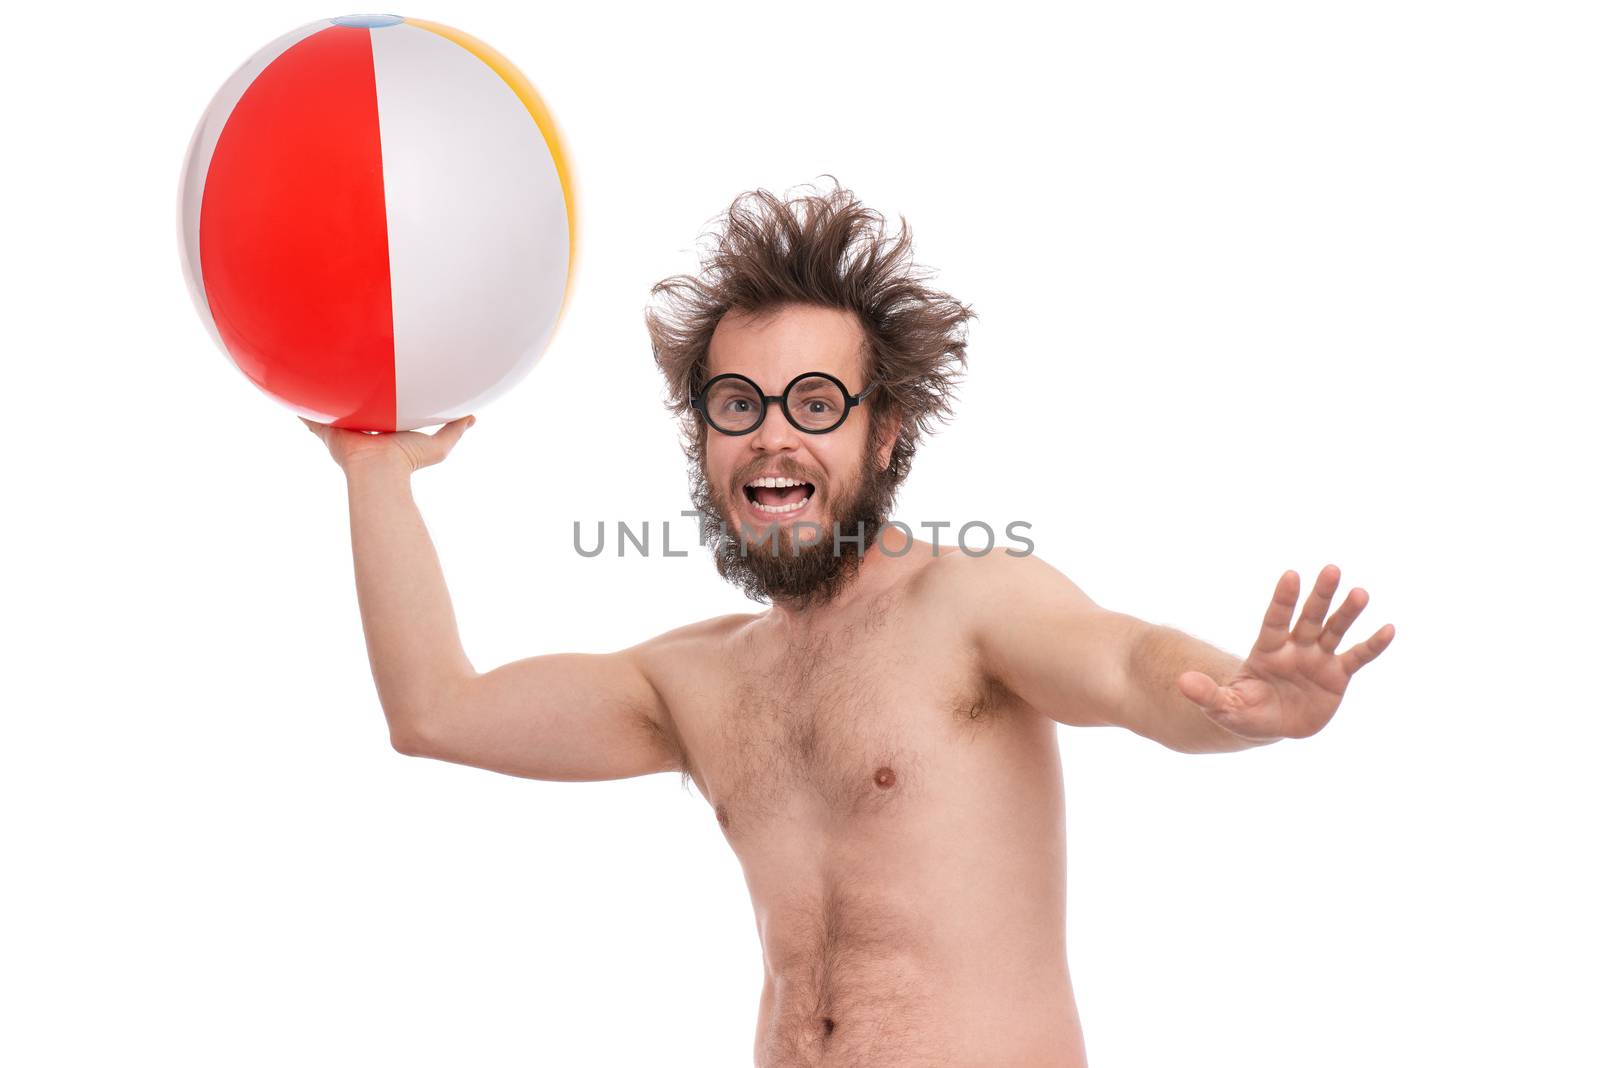 Crazy bearded Man with funny Haircut in eye Glasses, ready for fun at sunny beach. Happy and silly tourist, isolated on white background. Cheerful naked man holding Sea Ball.